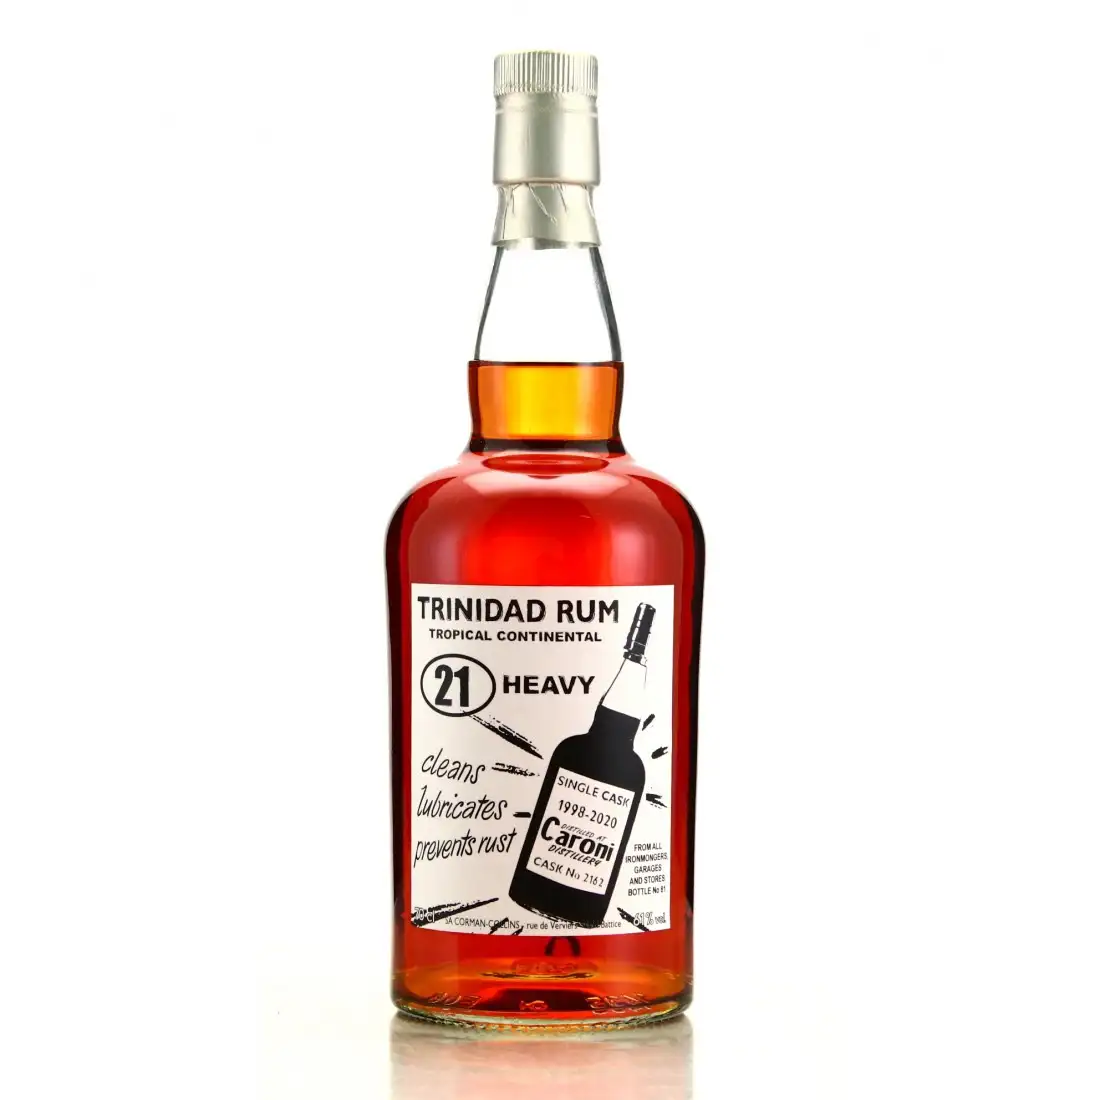 Image of the front of the bottle of the rum 1998